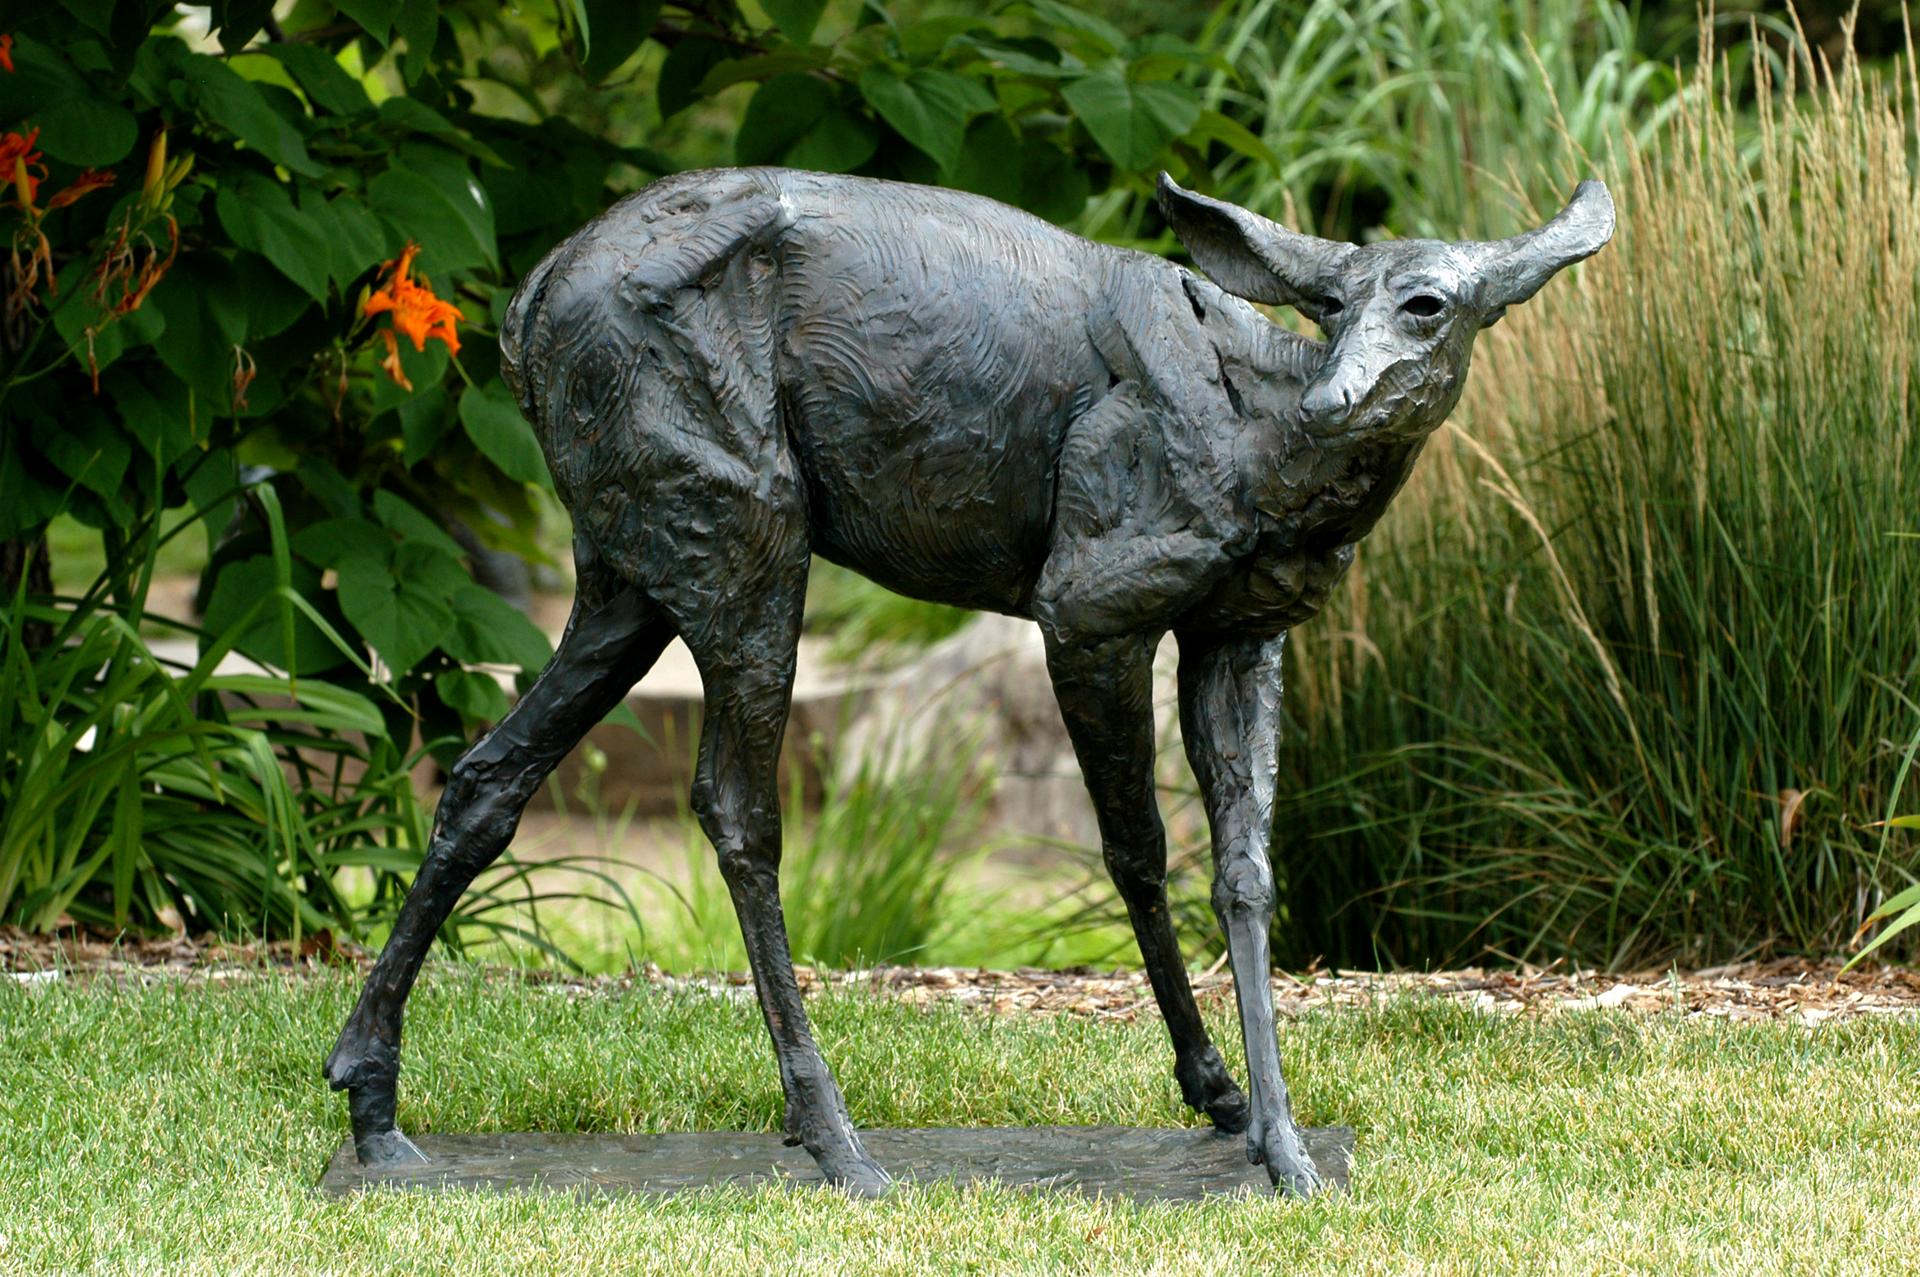 A Change of Direction by Darrell Davis
bronze deer sculpture 
36 x 35 x 18.5 in. Limited edition of 8

ABOUT THE ARTIST: ​Wildlife sculptor, Darrell Davis, knew at age 15 he wanted to be a sculptor after visiting the South Carolina’s Brookgreen